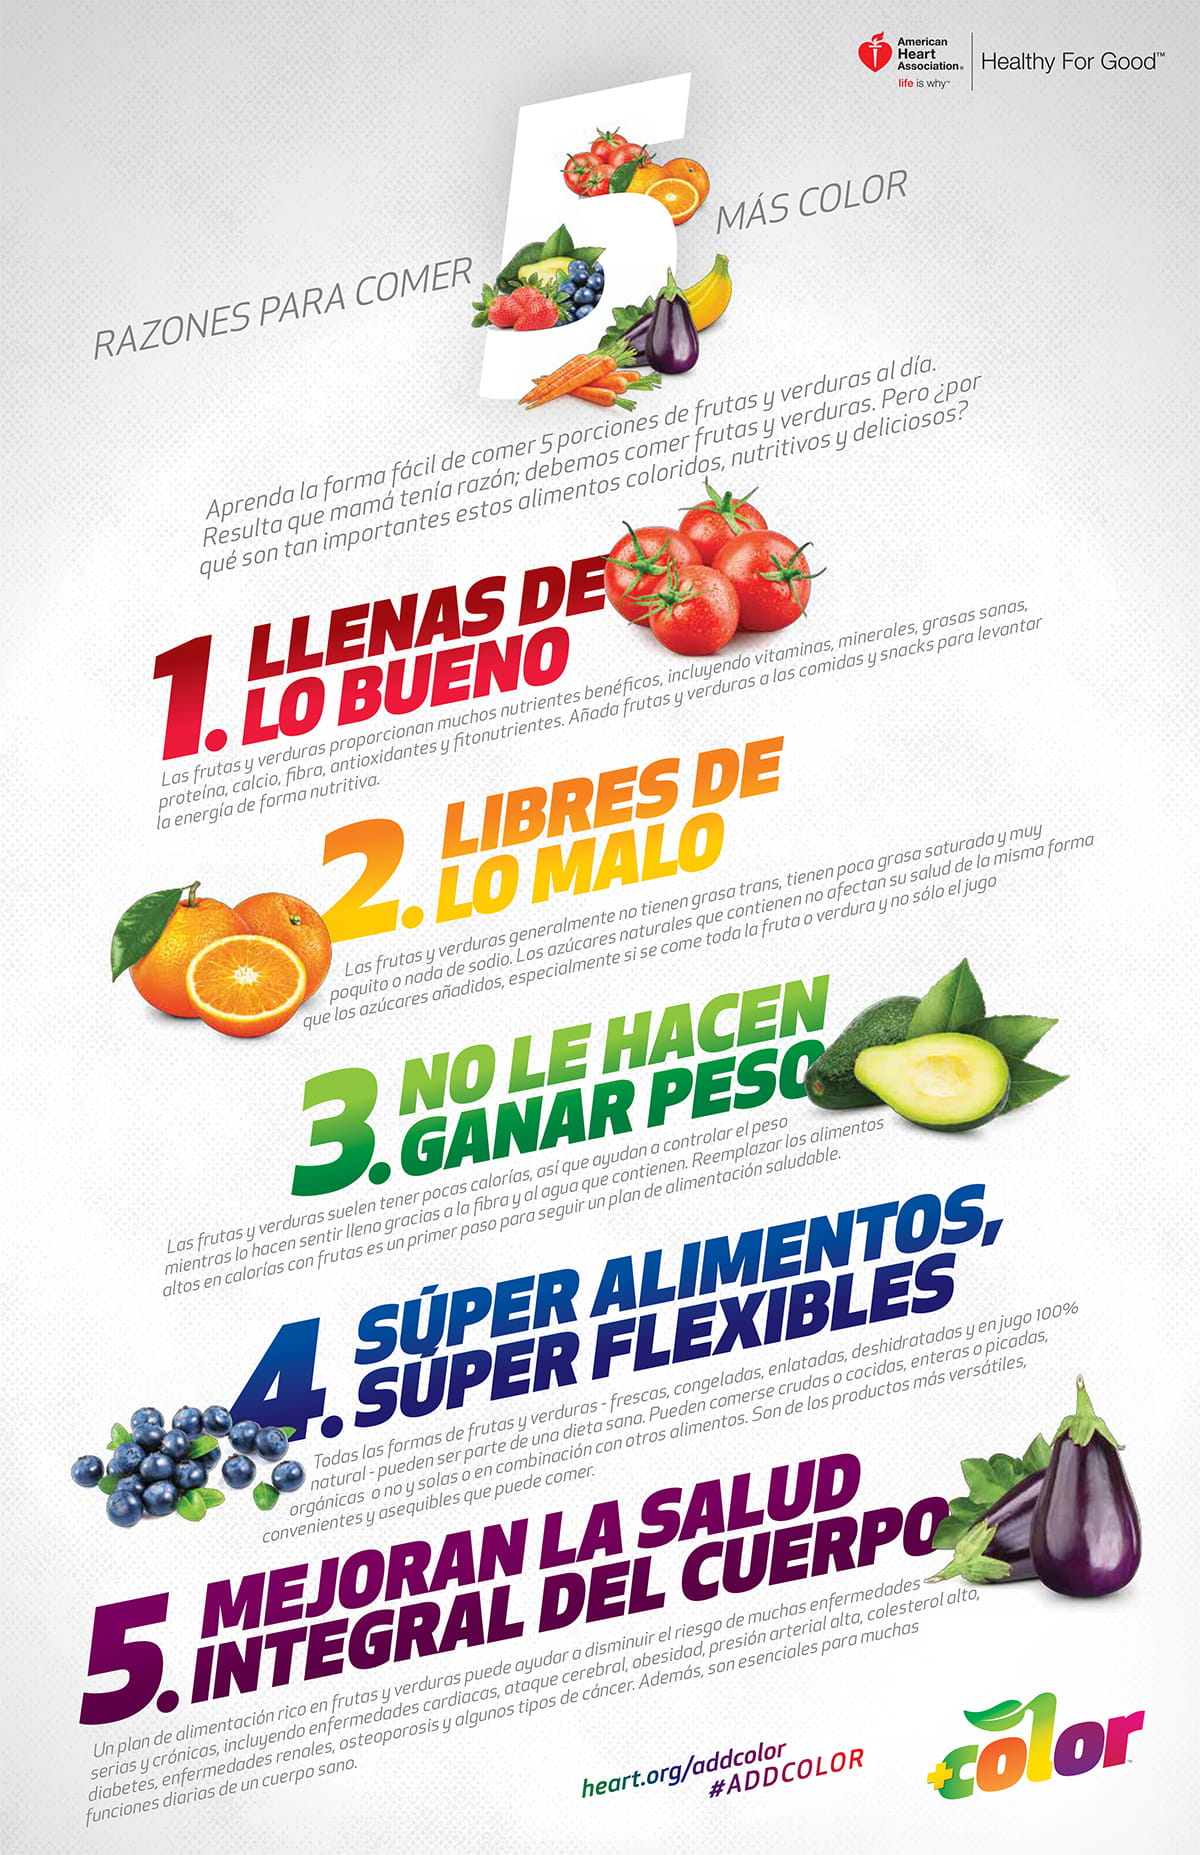 5 reasons to add color infographic in Spanish